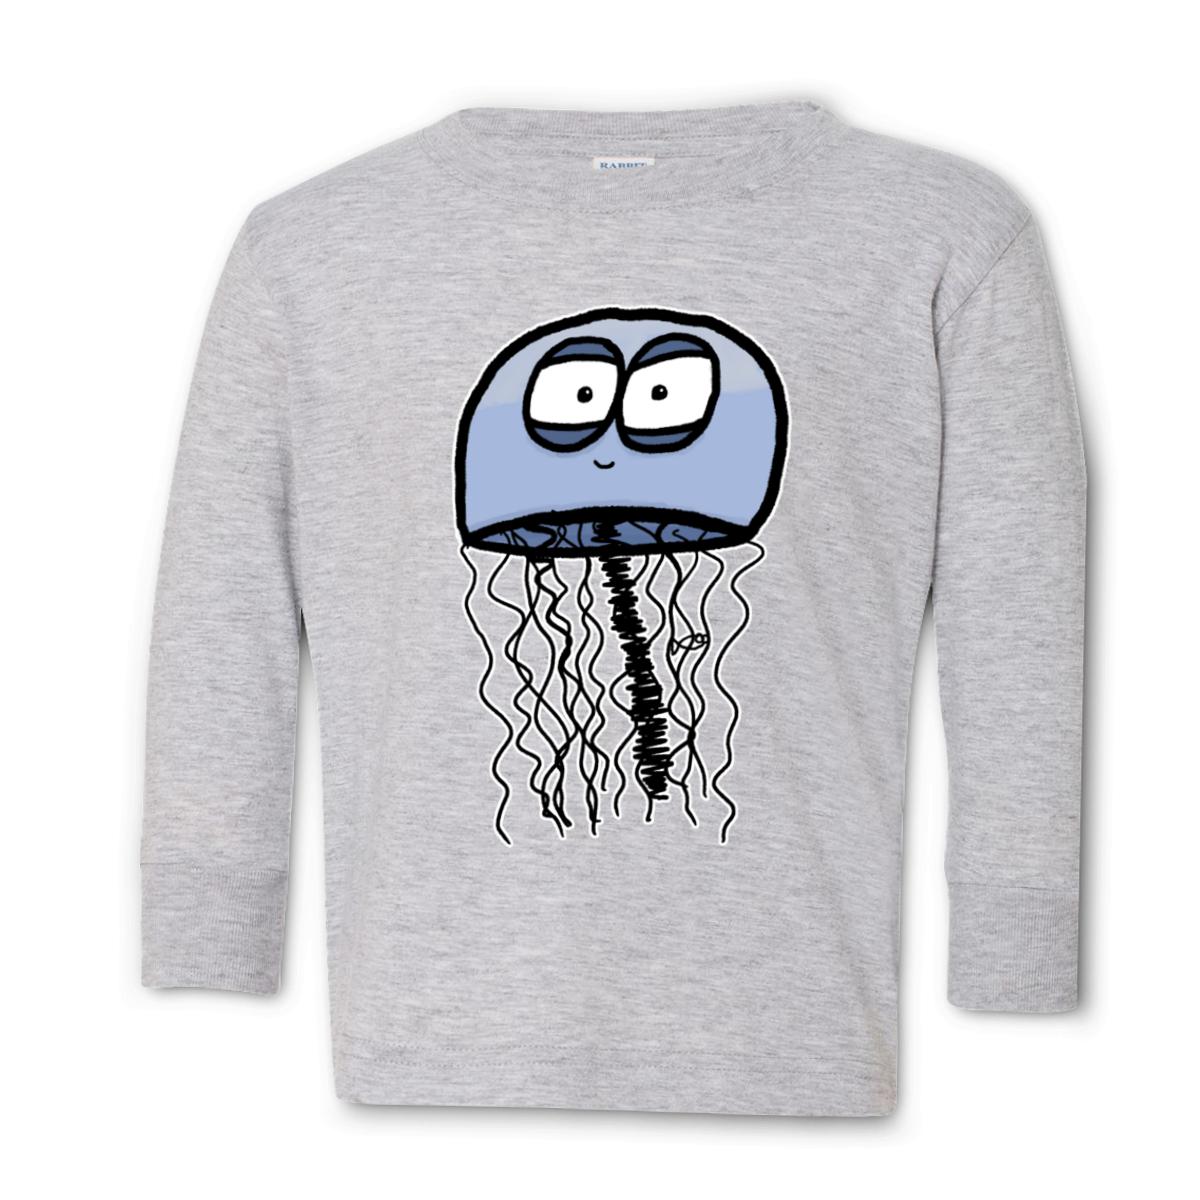 Jelly Fish Toddler Long Sleeve Tee 4T heather